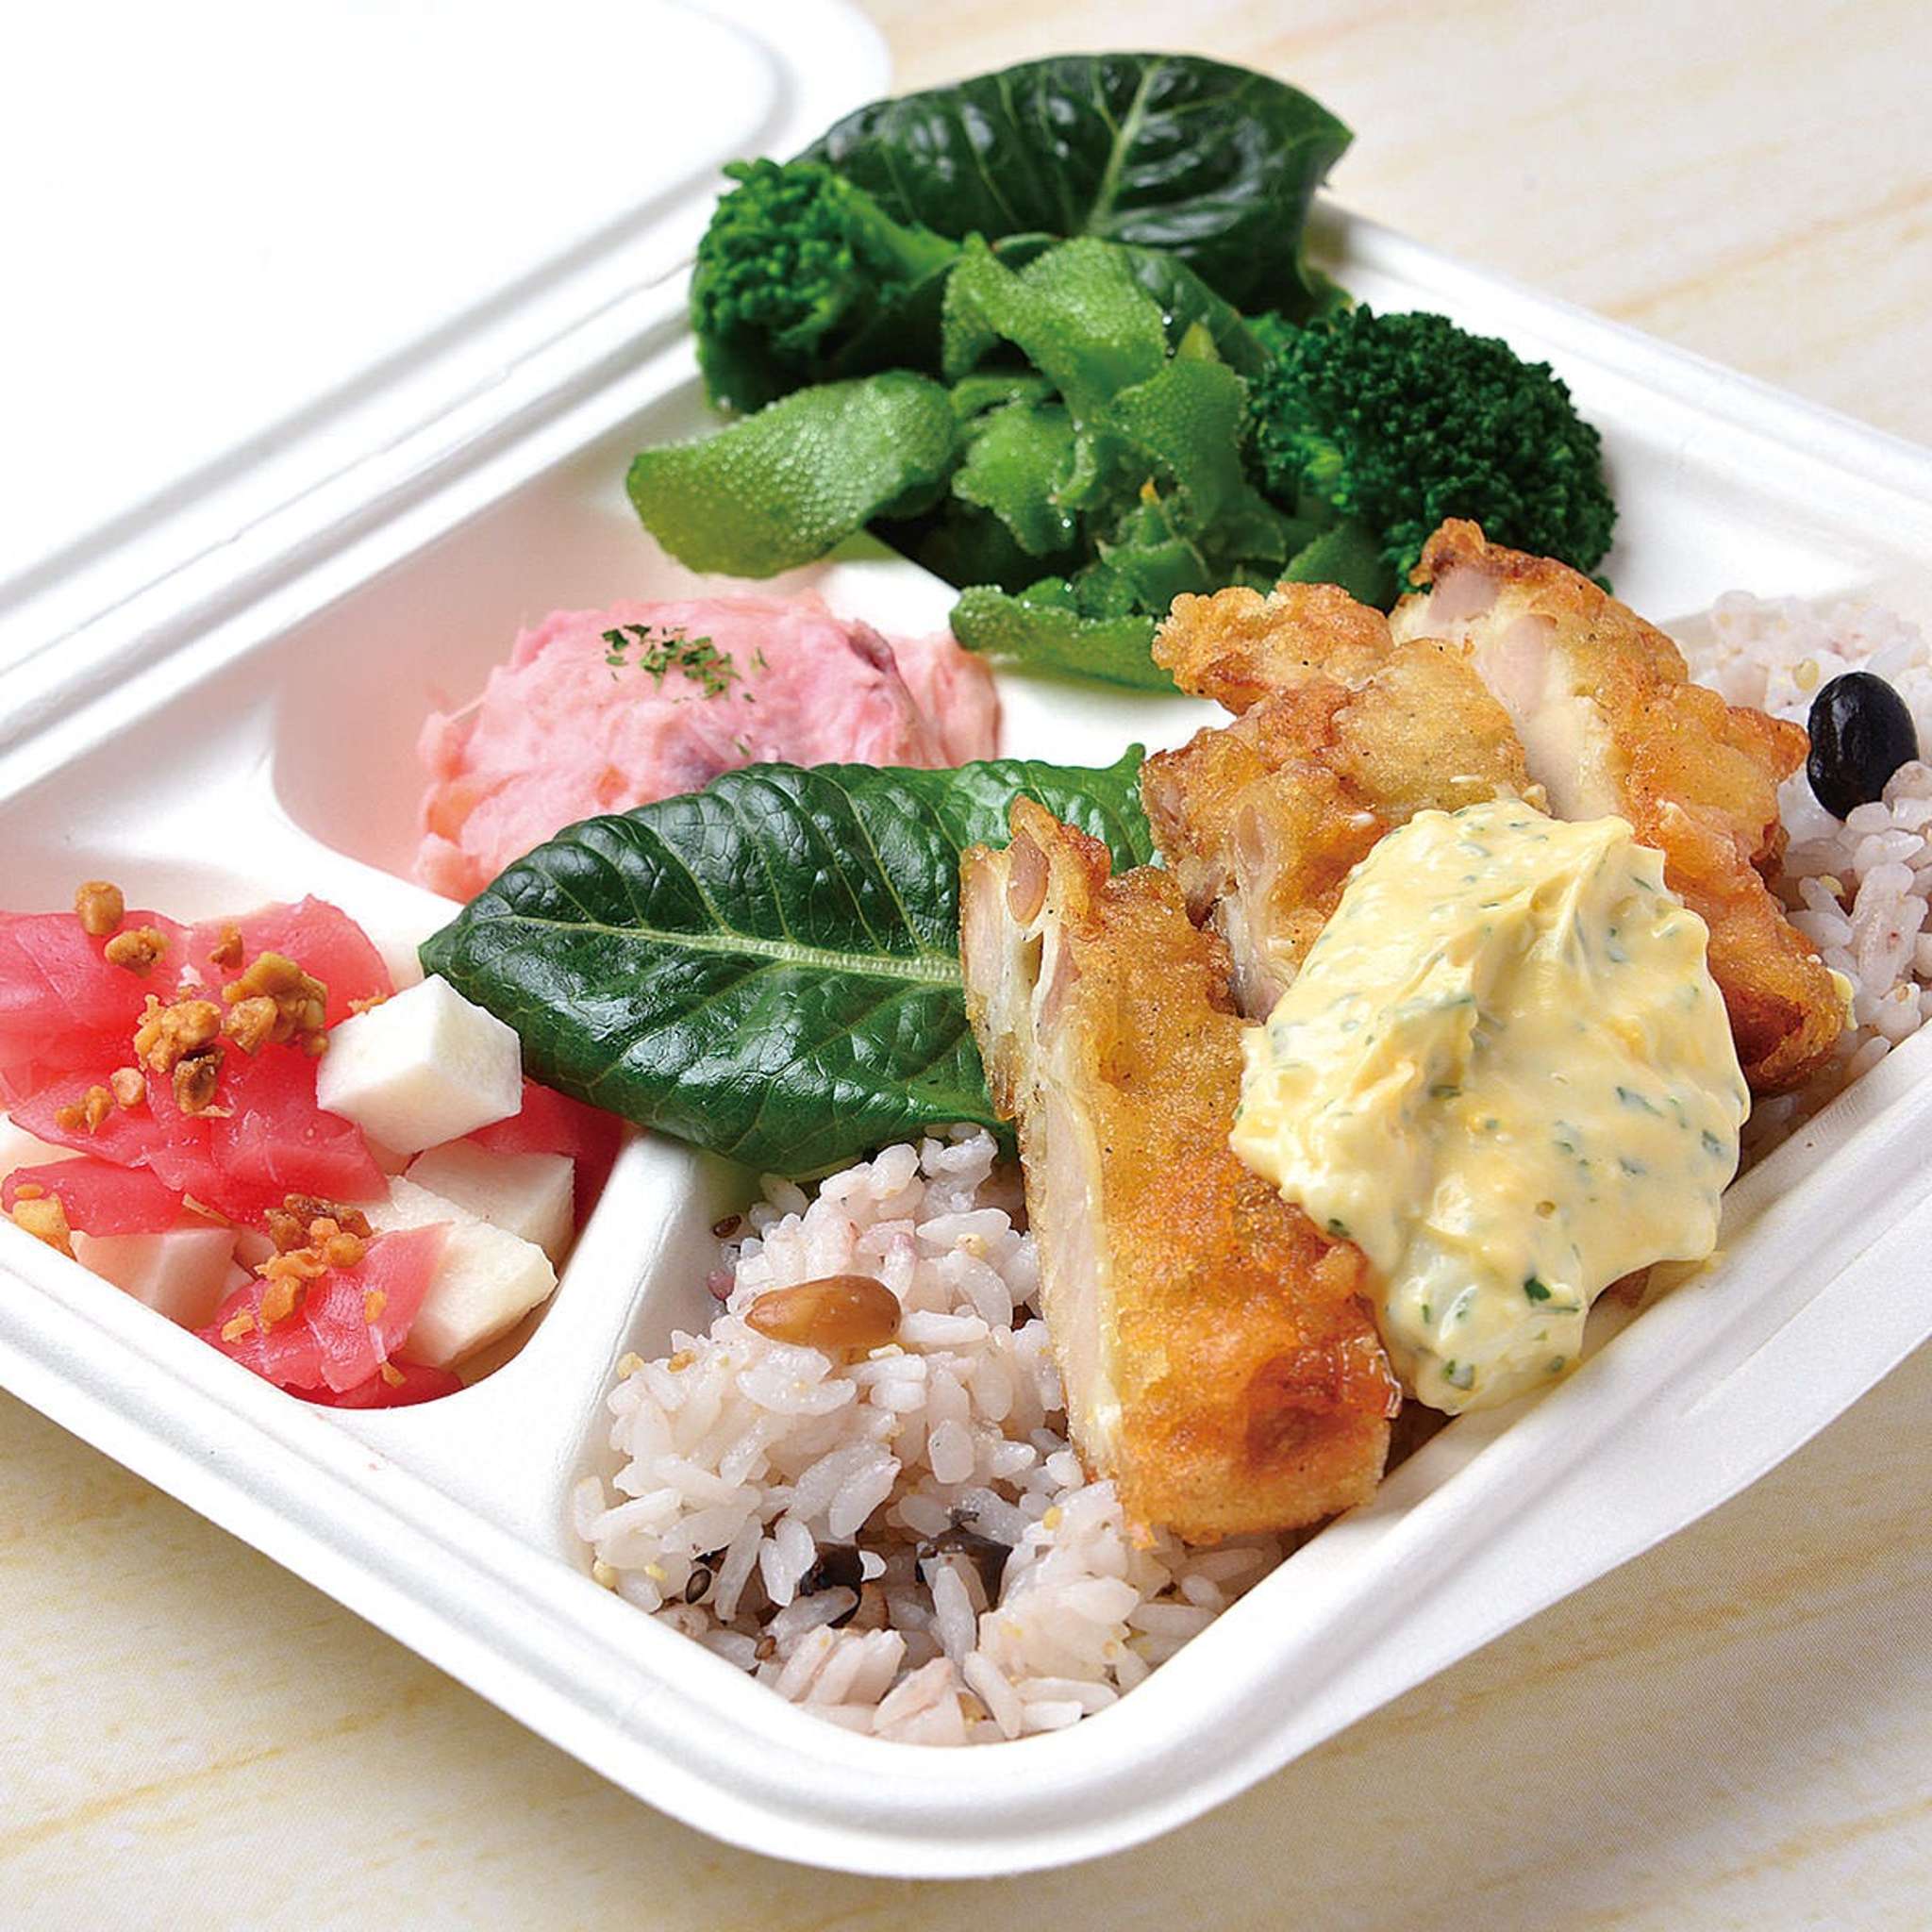 Weekday limited take-out lunch box